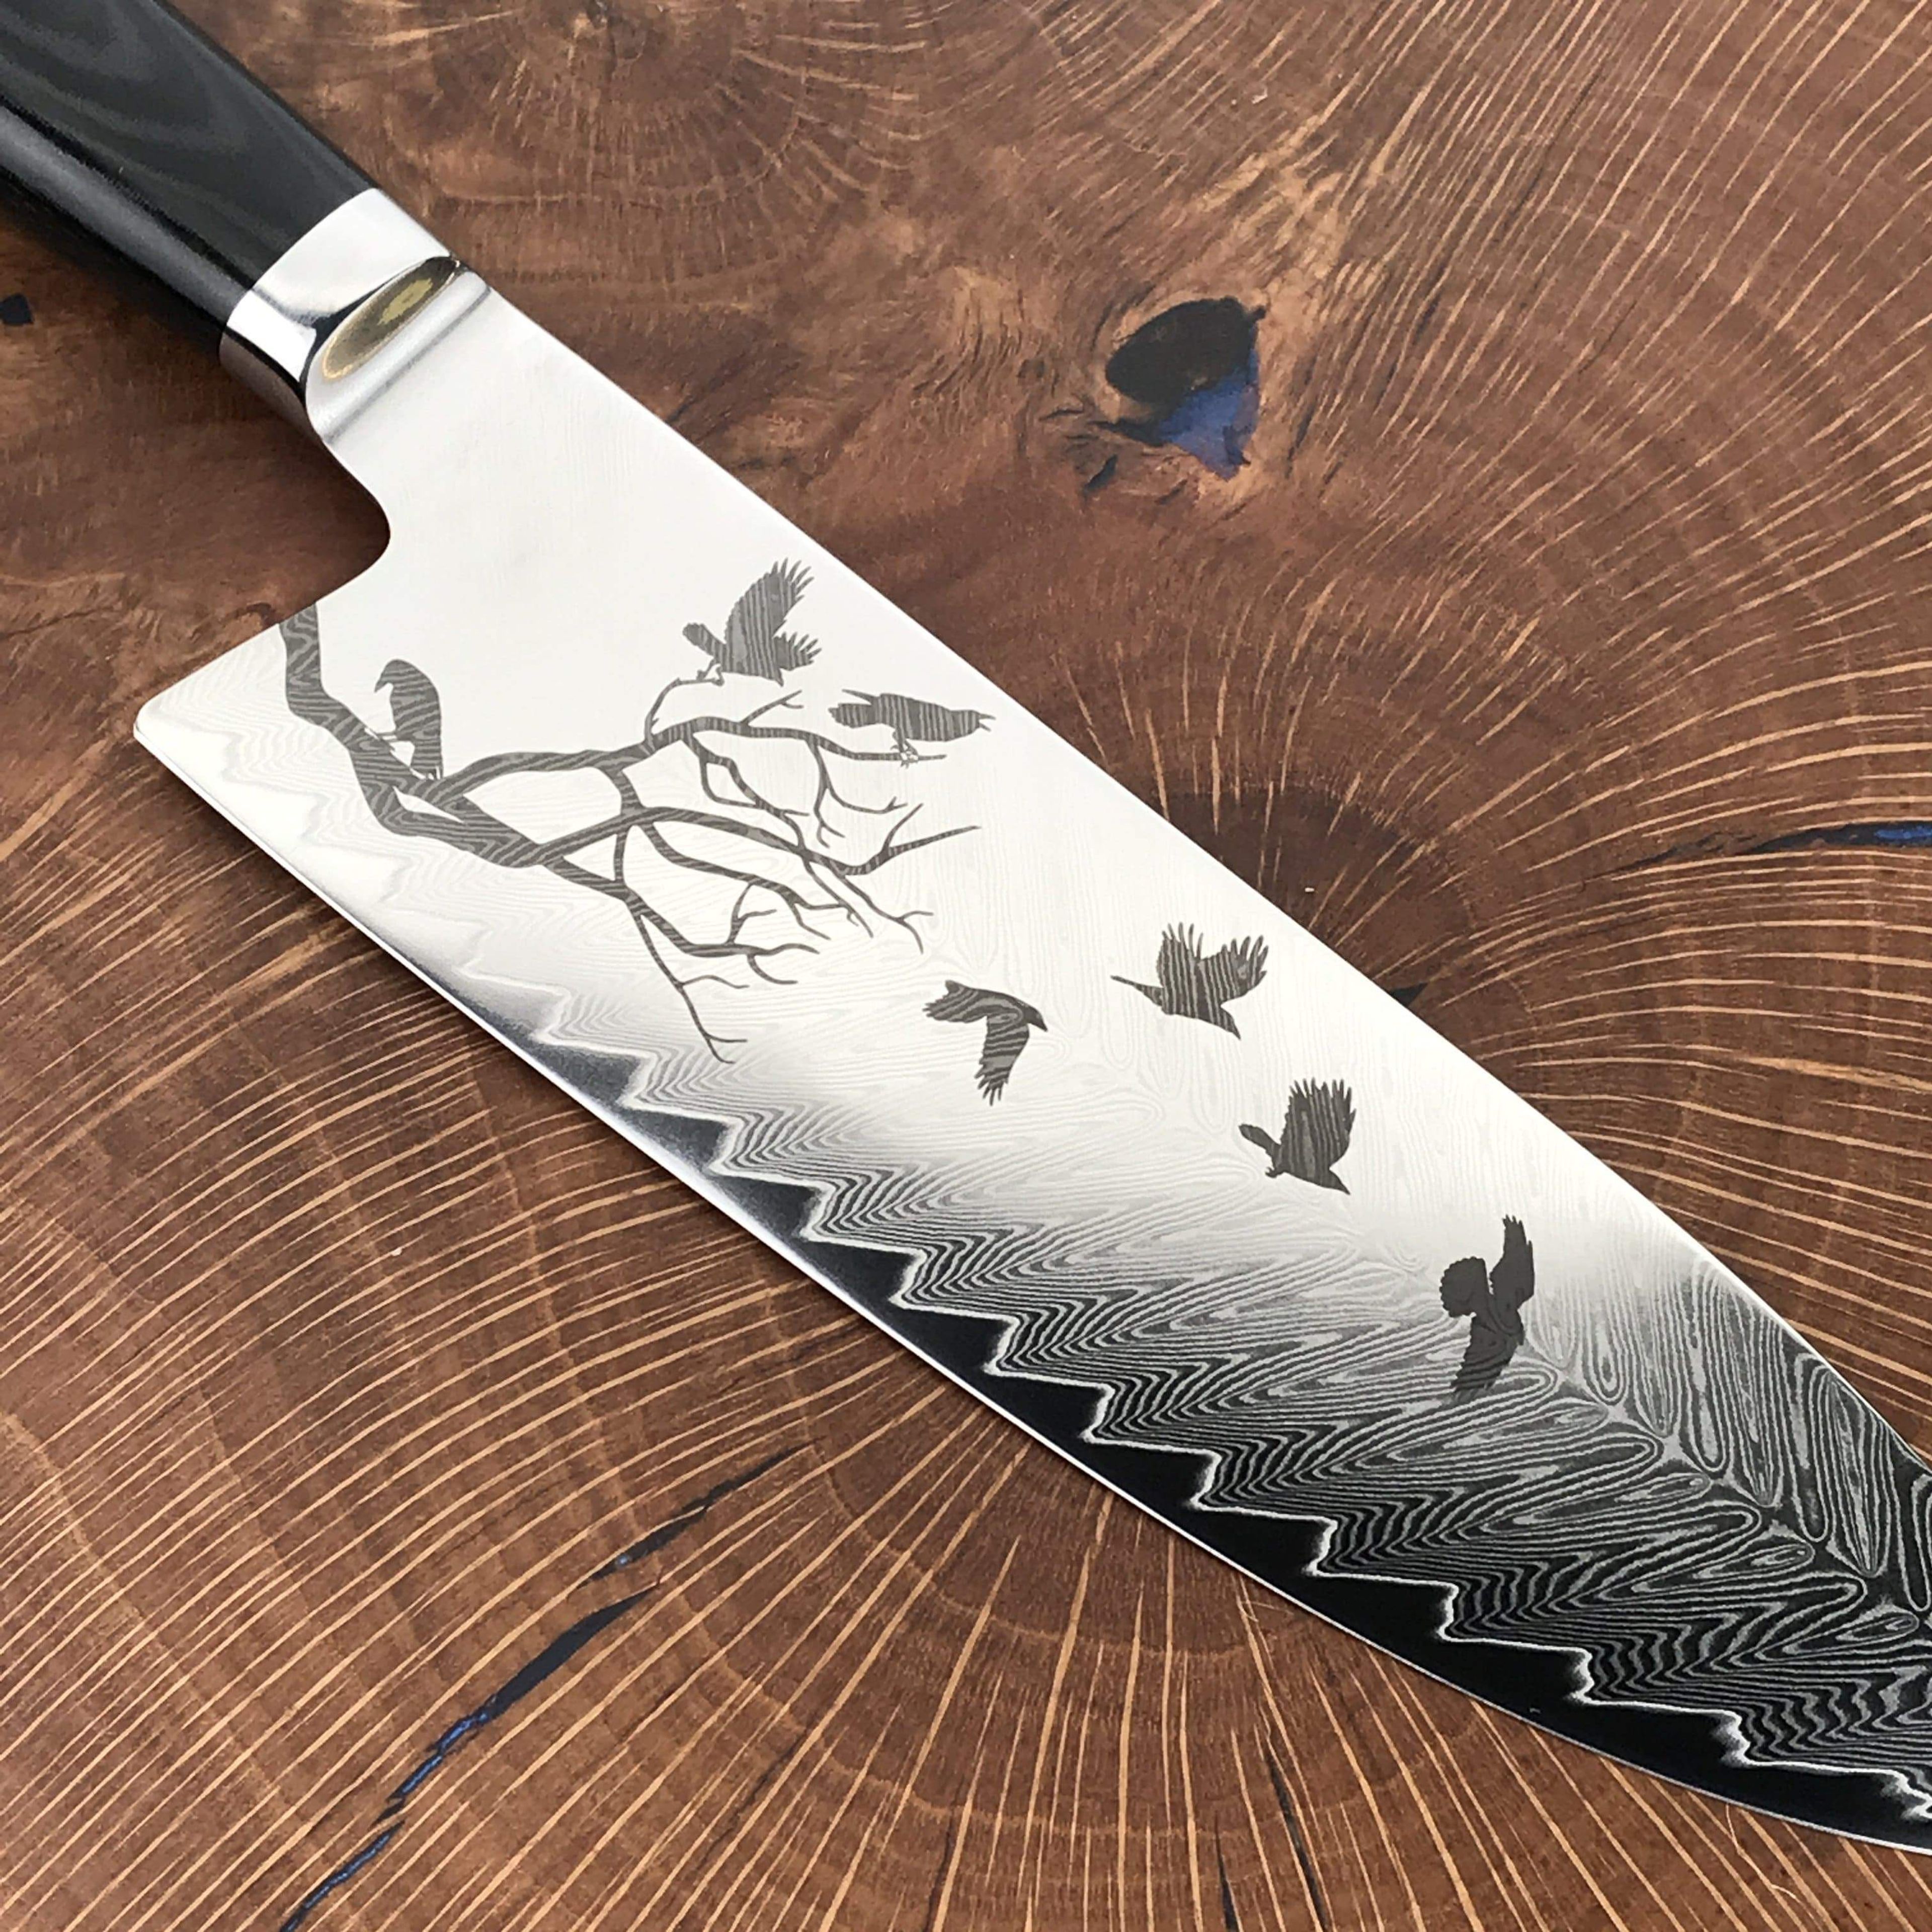 DAMASCUS Bowie Chef Engraved Series